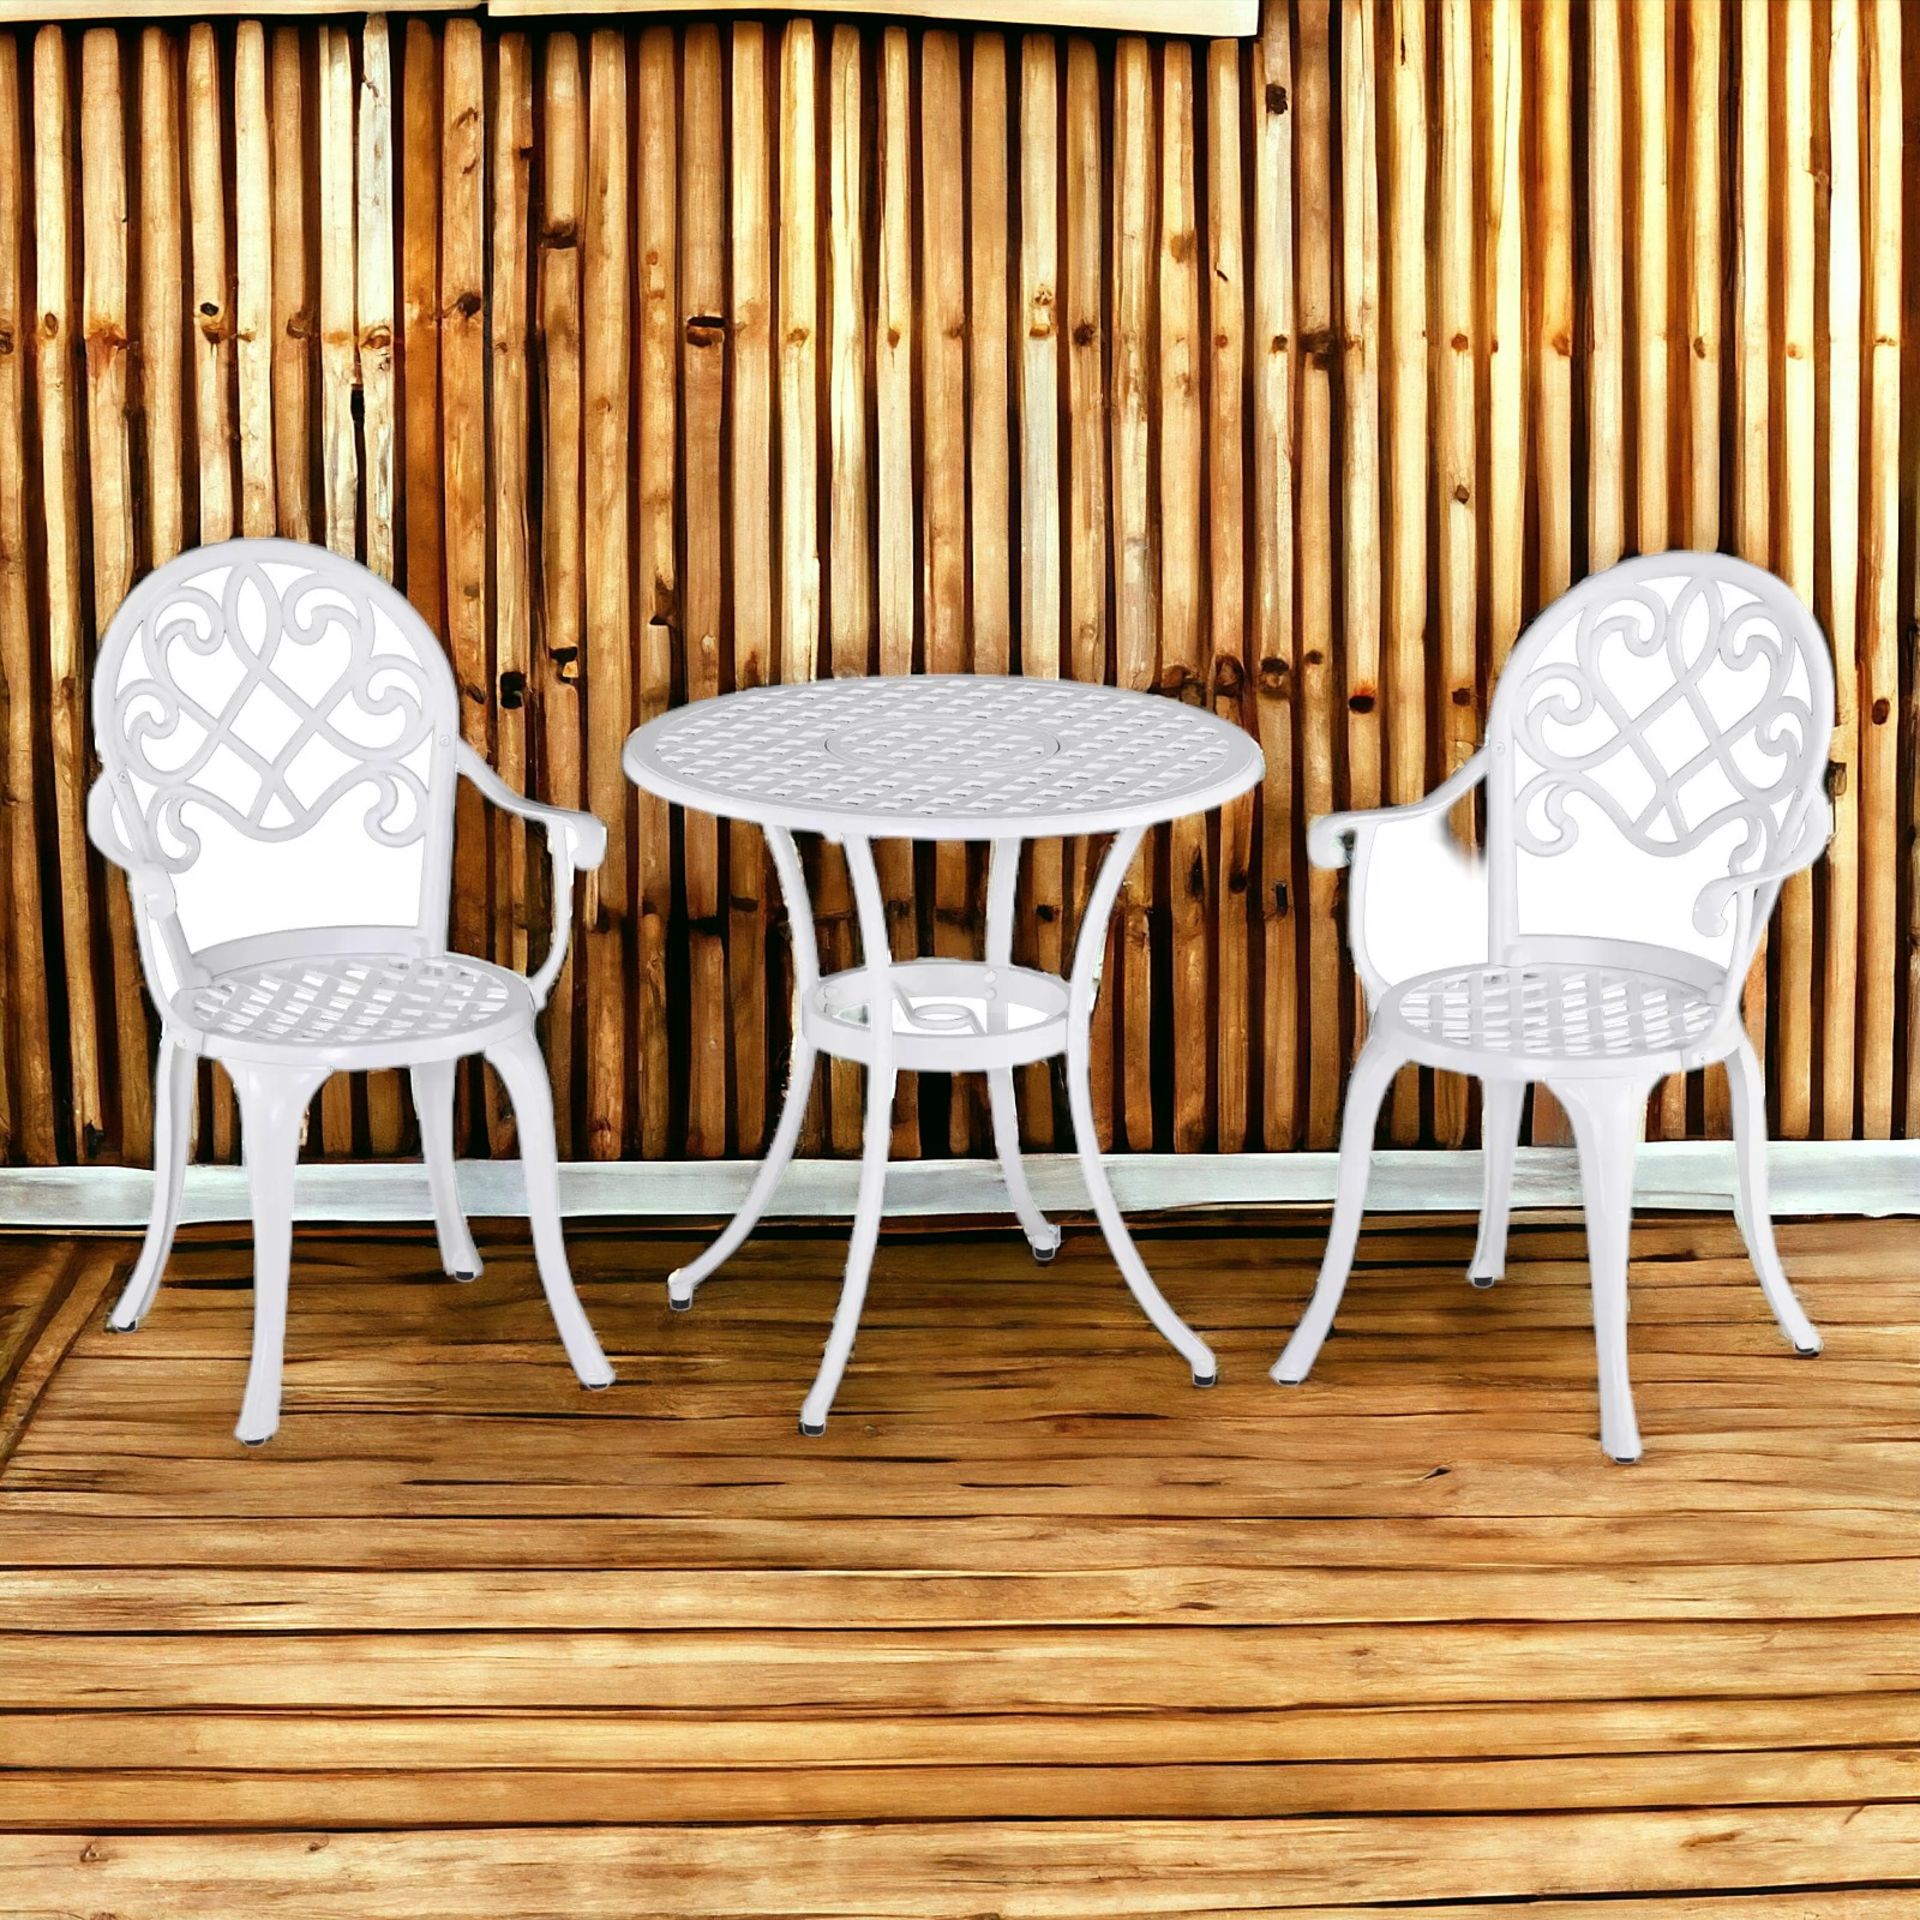 FREE DELIVERY - BRAND NEW 3PCS GARDEN BISTRO SET CAST ALUMINIUM ROUND TABLE WITH 2 CHAIRS WHITE - Image 2 of 2